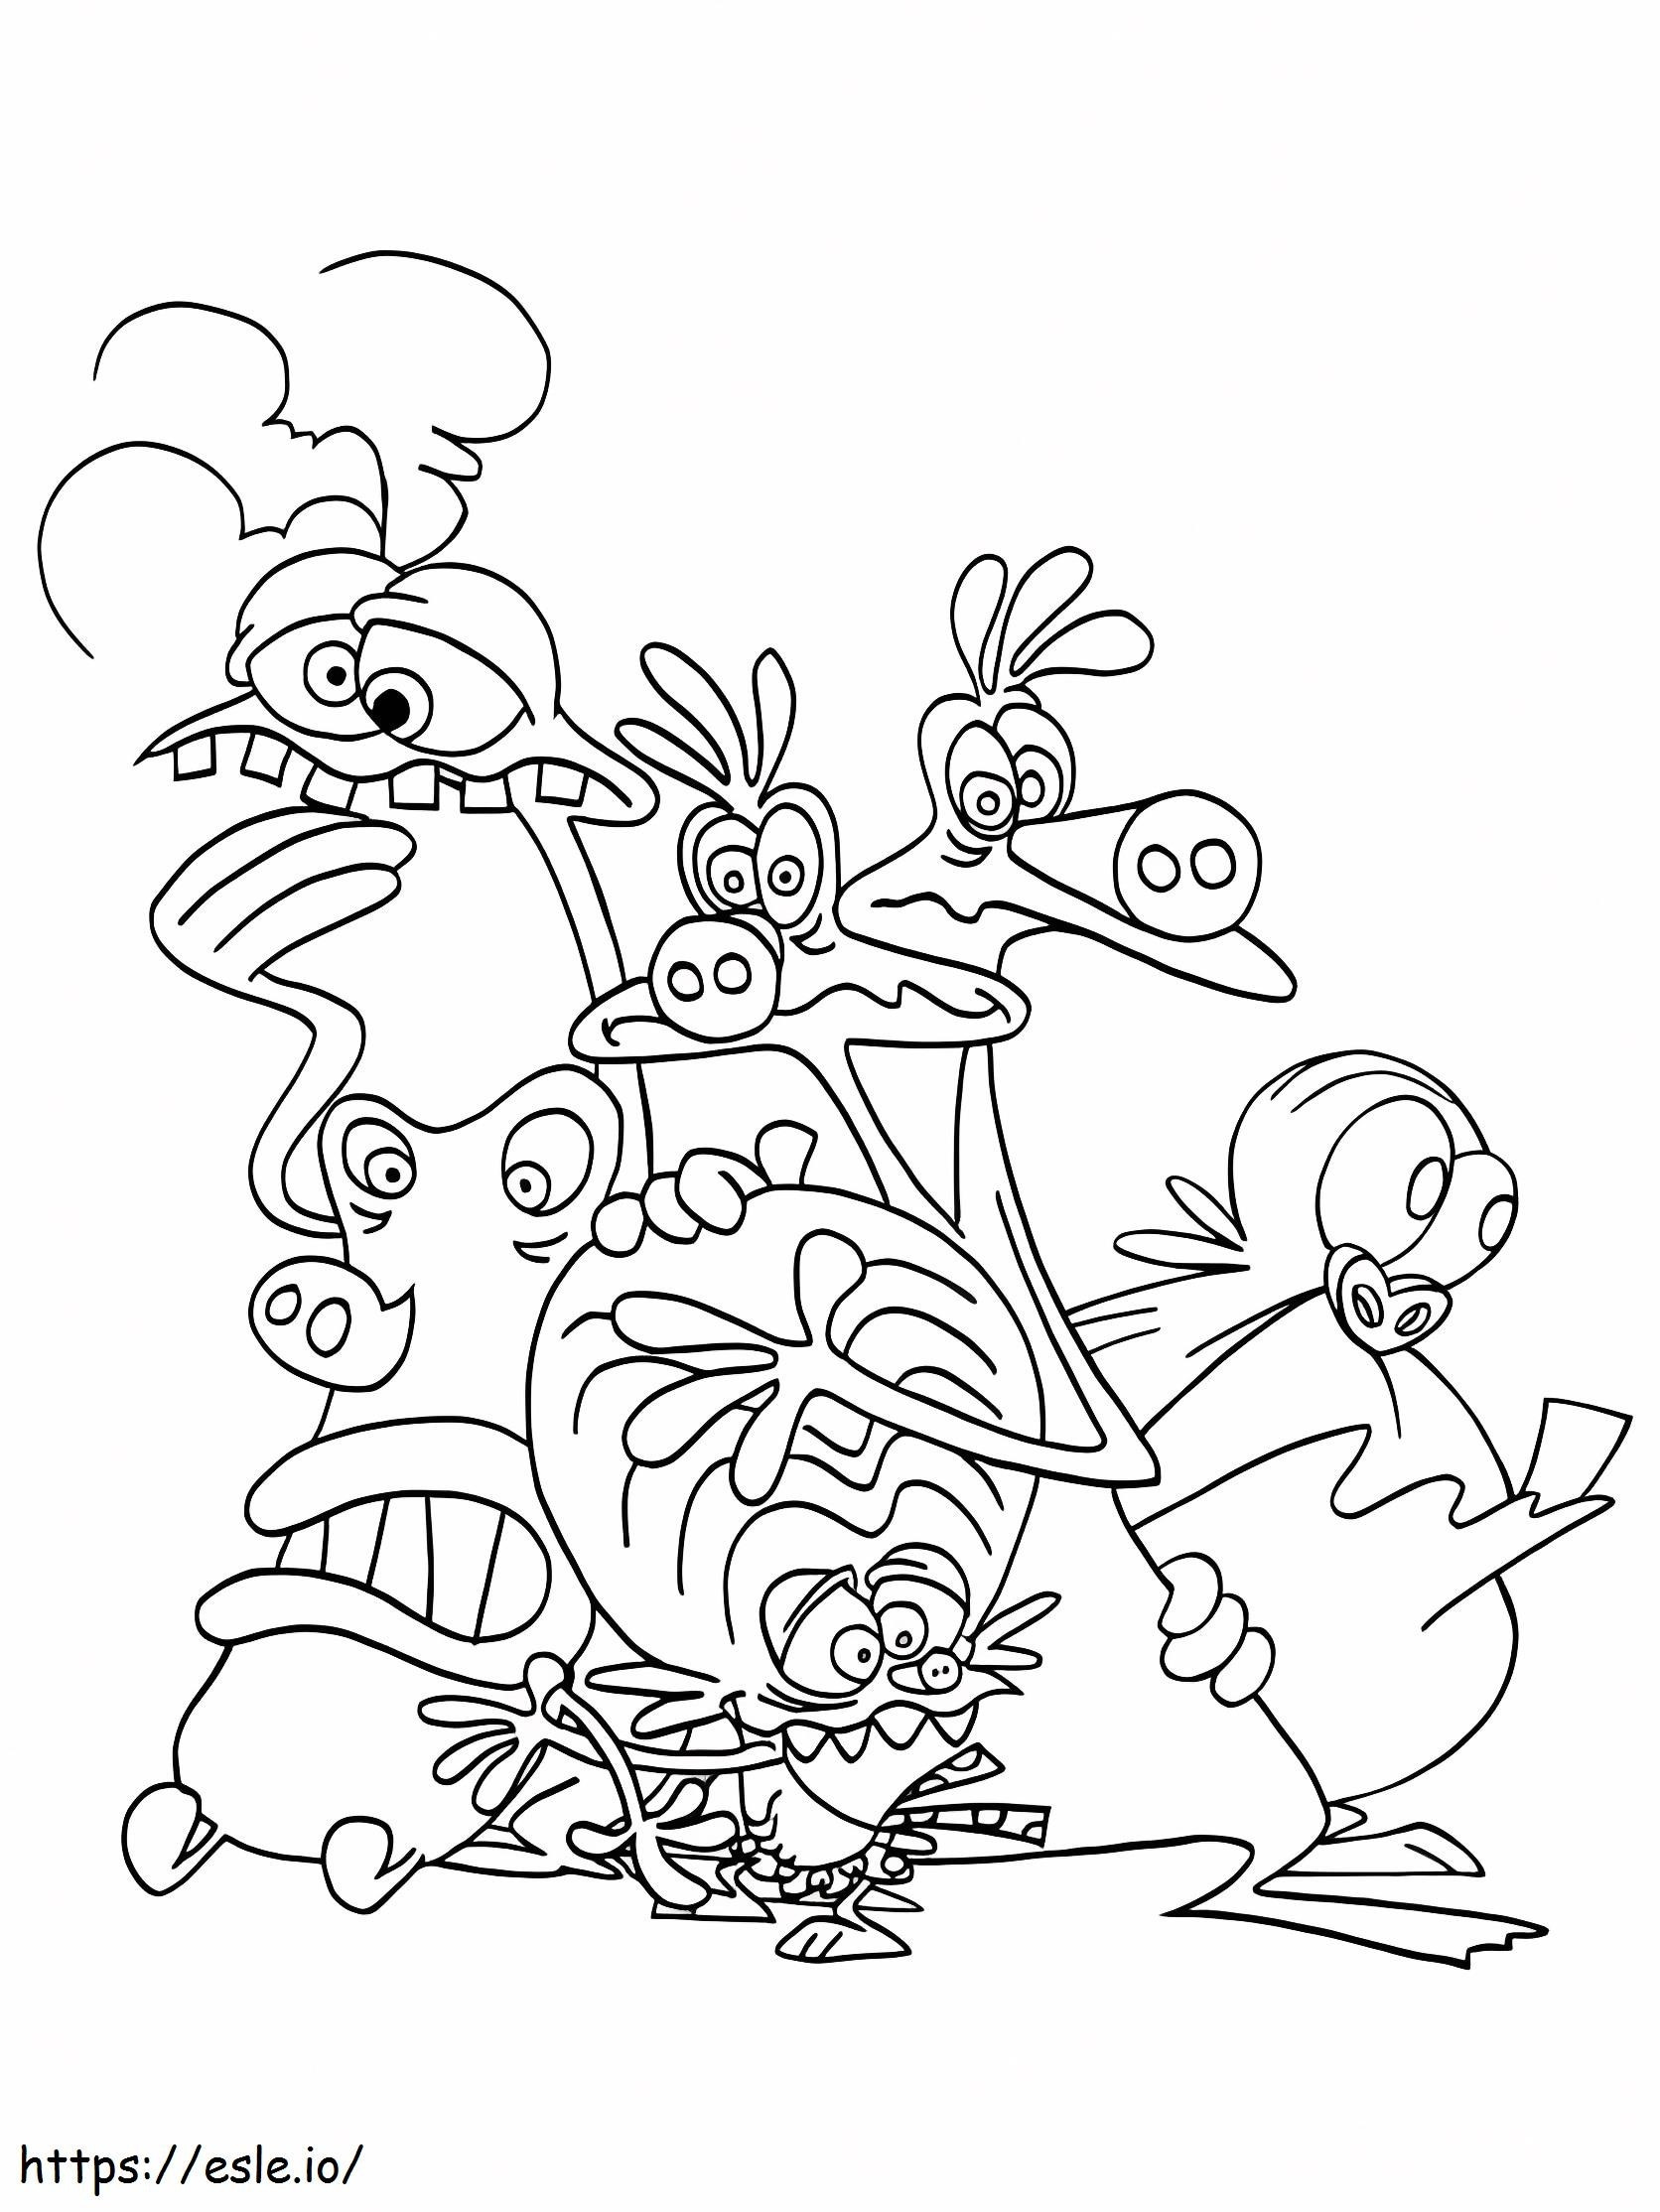 Space Goofs Printable coloring page